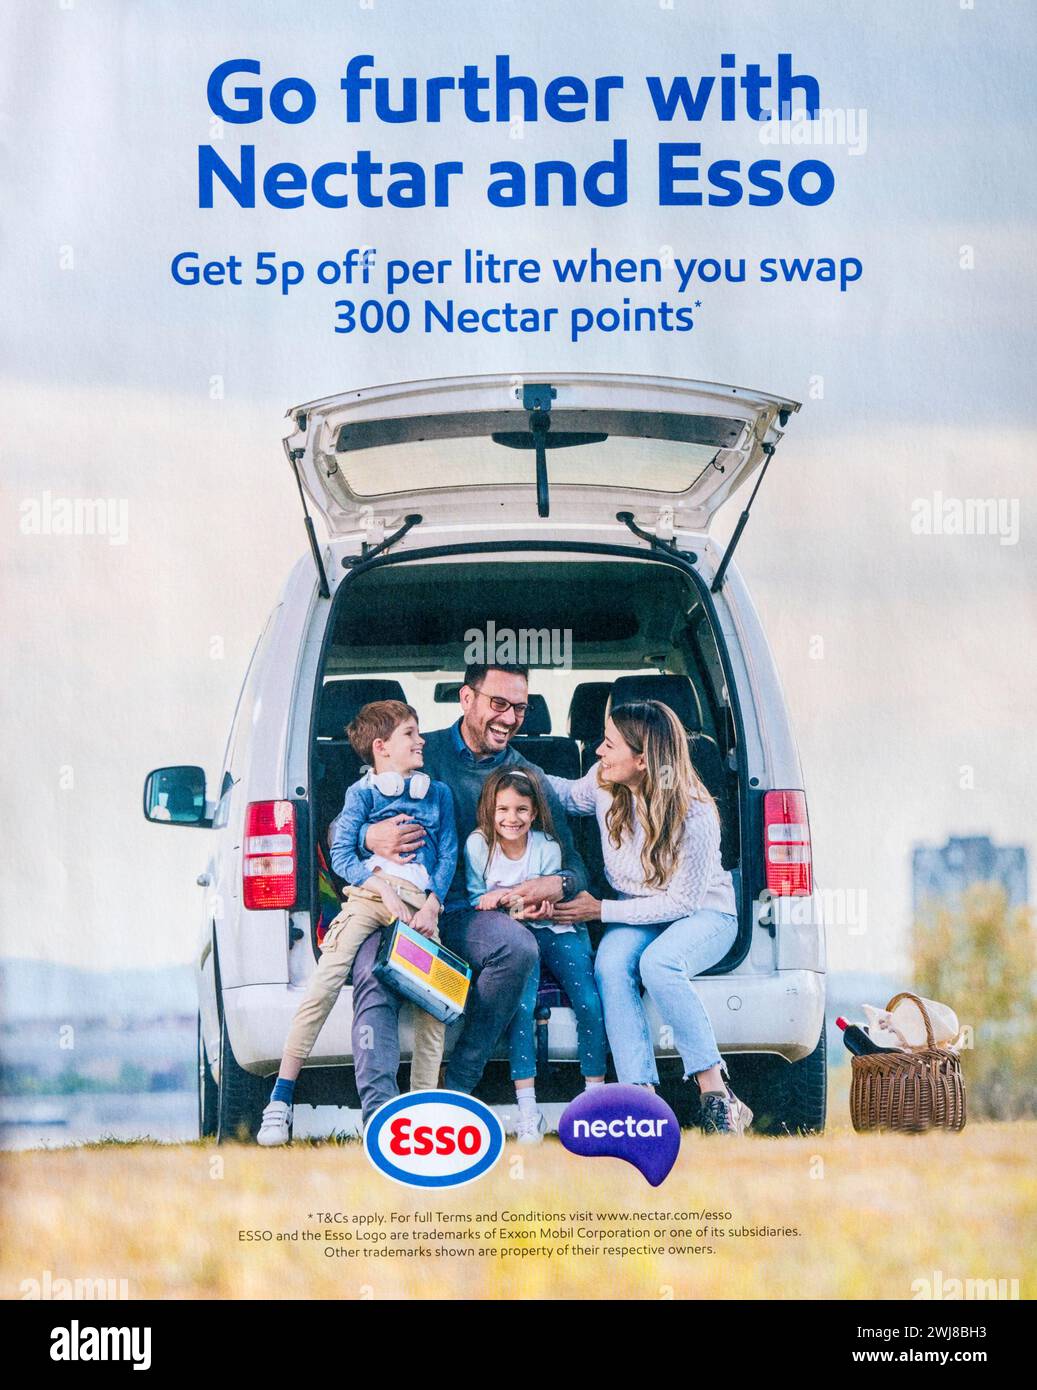 Magazine advertisement for Esso petrol and Nectar points. Stock Photo